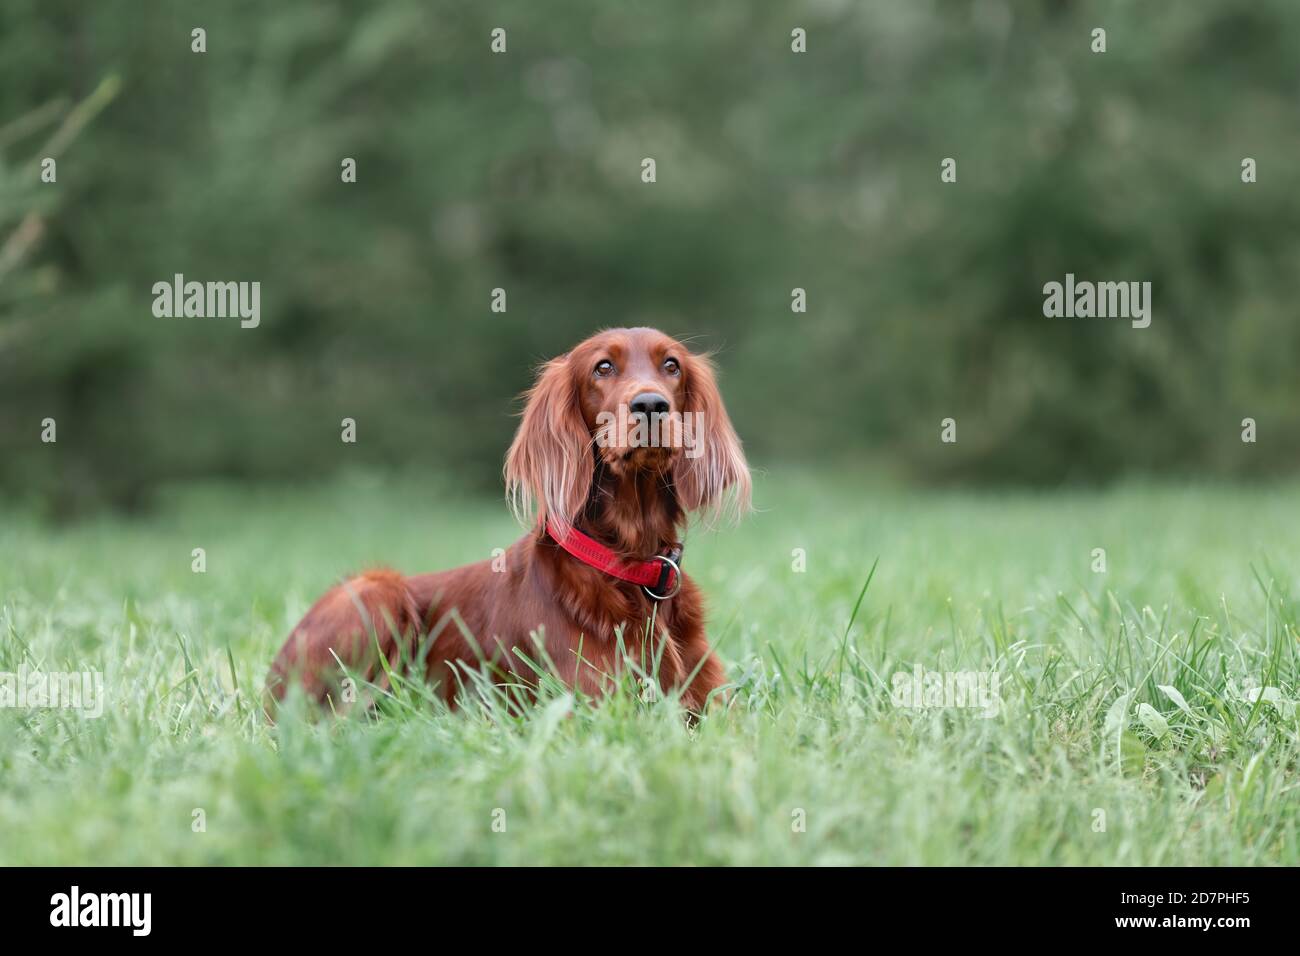 Young irish red setter dog at nature on green grass. Outdoor portrait of pet. Stock Photo